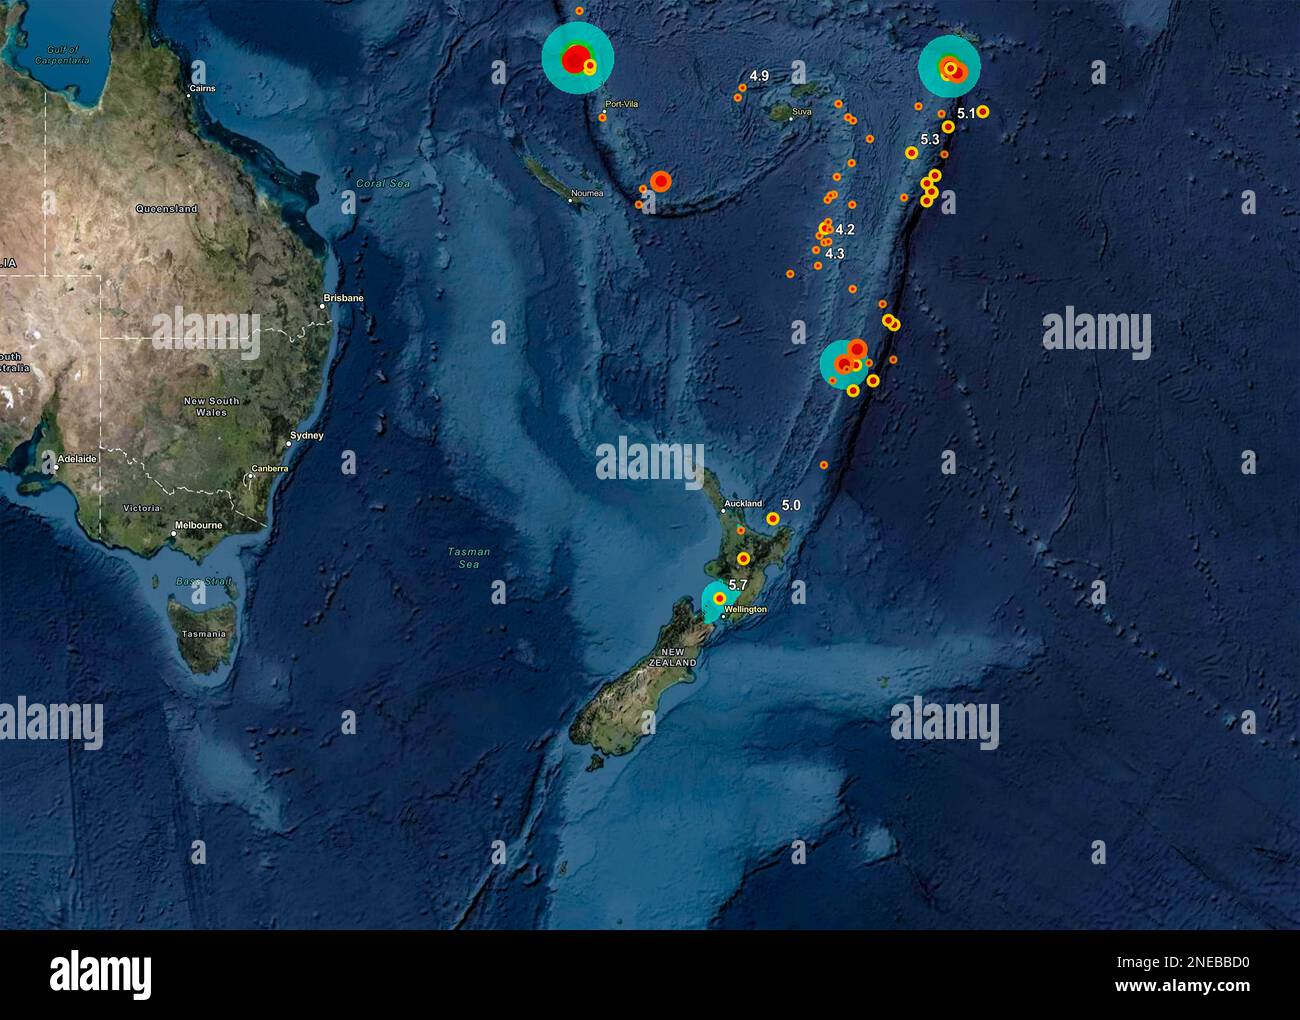 Dresden, Germany - February 15, 2023: Map of New Zealand and Australia with recent earthquakes location depicted as dots by ESRI real time detection s Stock Photo